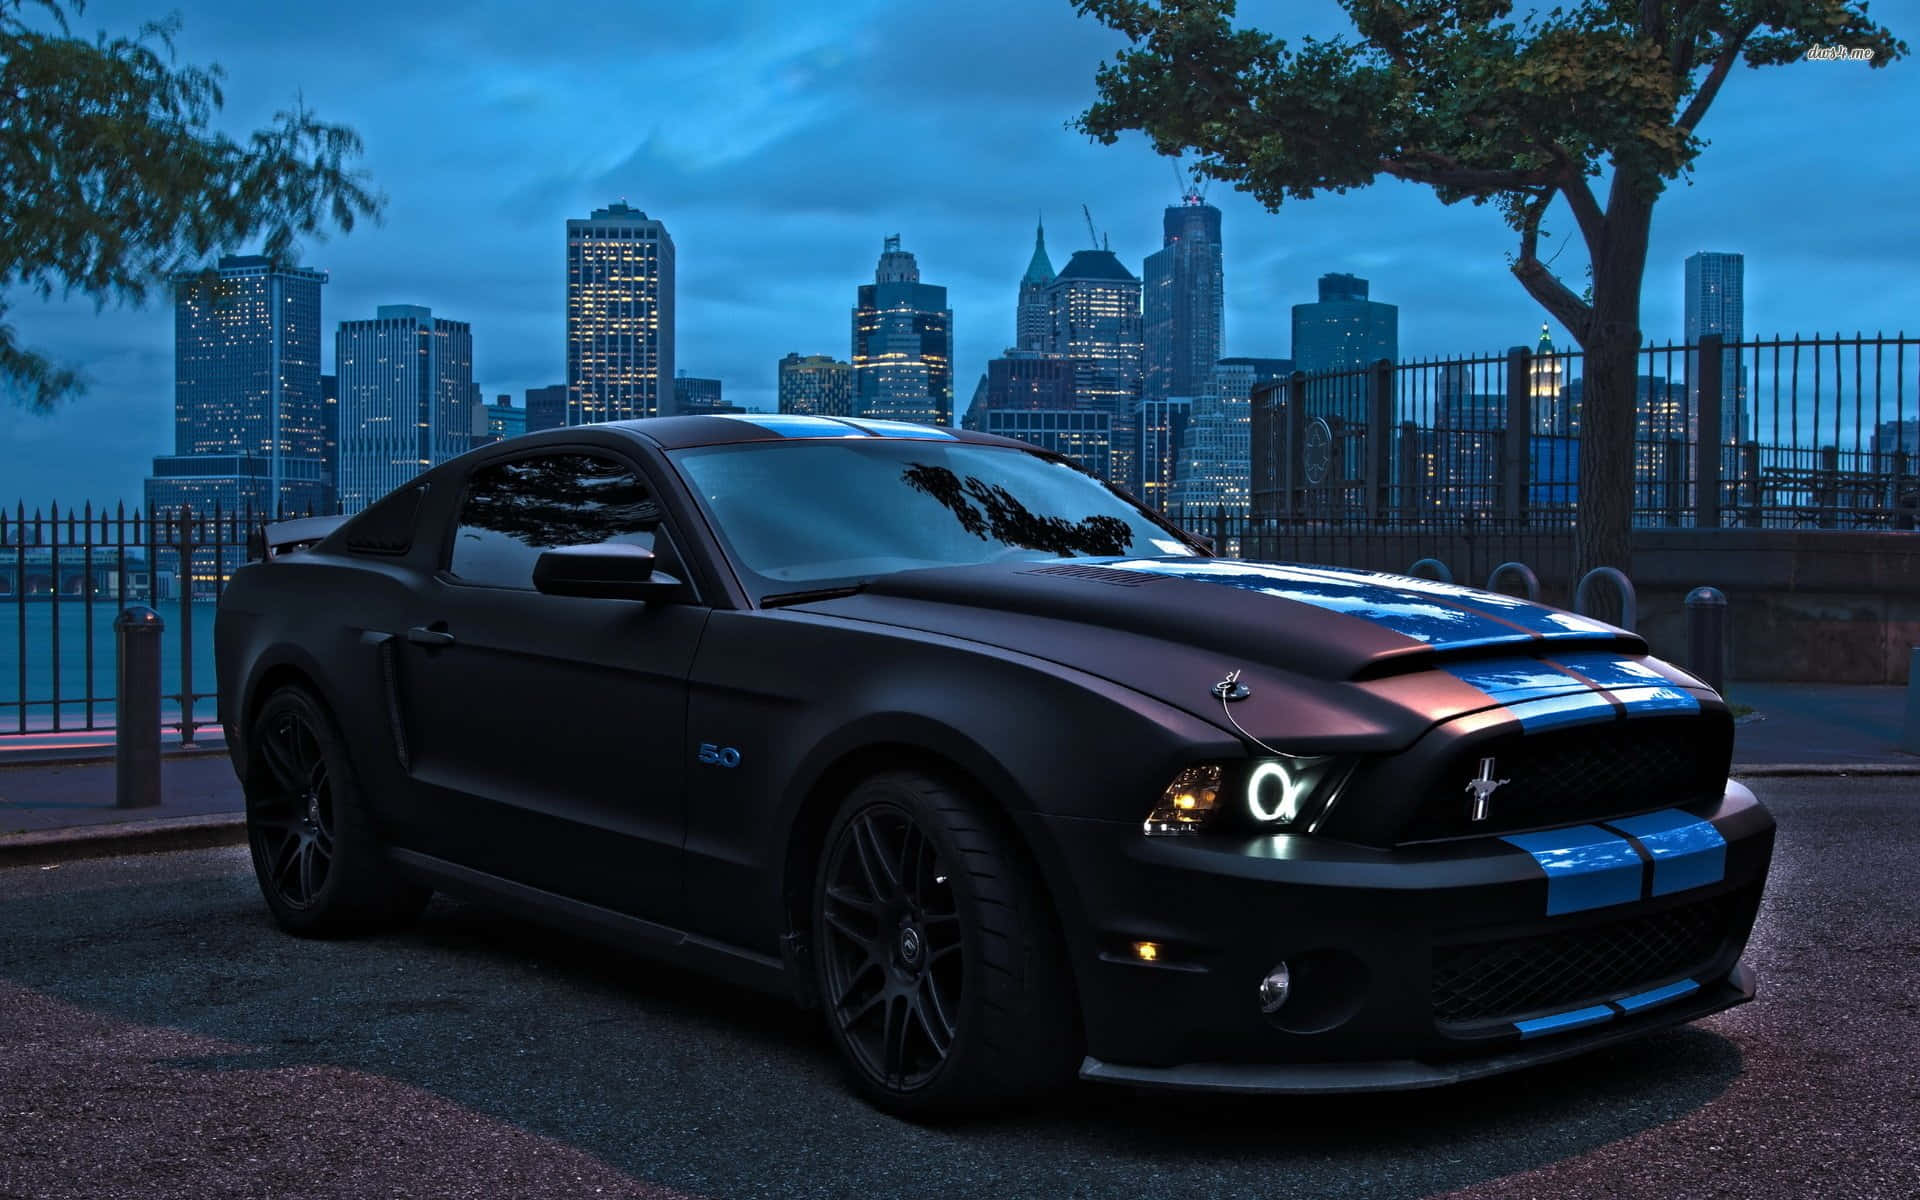 Black Live Car Ford Mustang Background